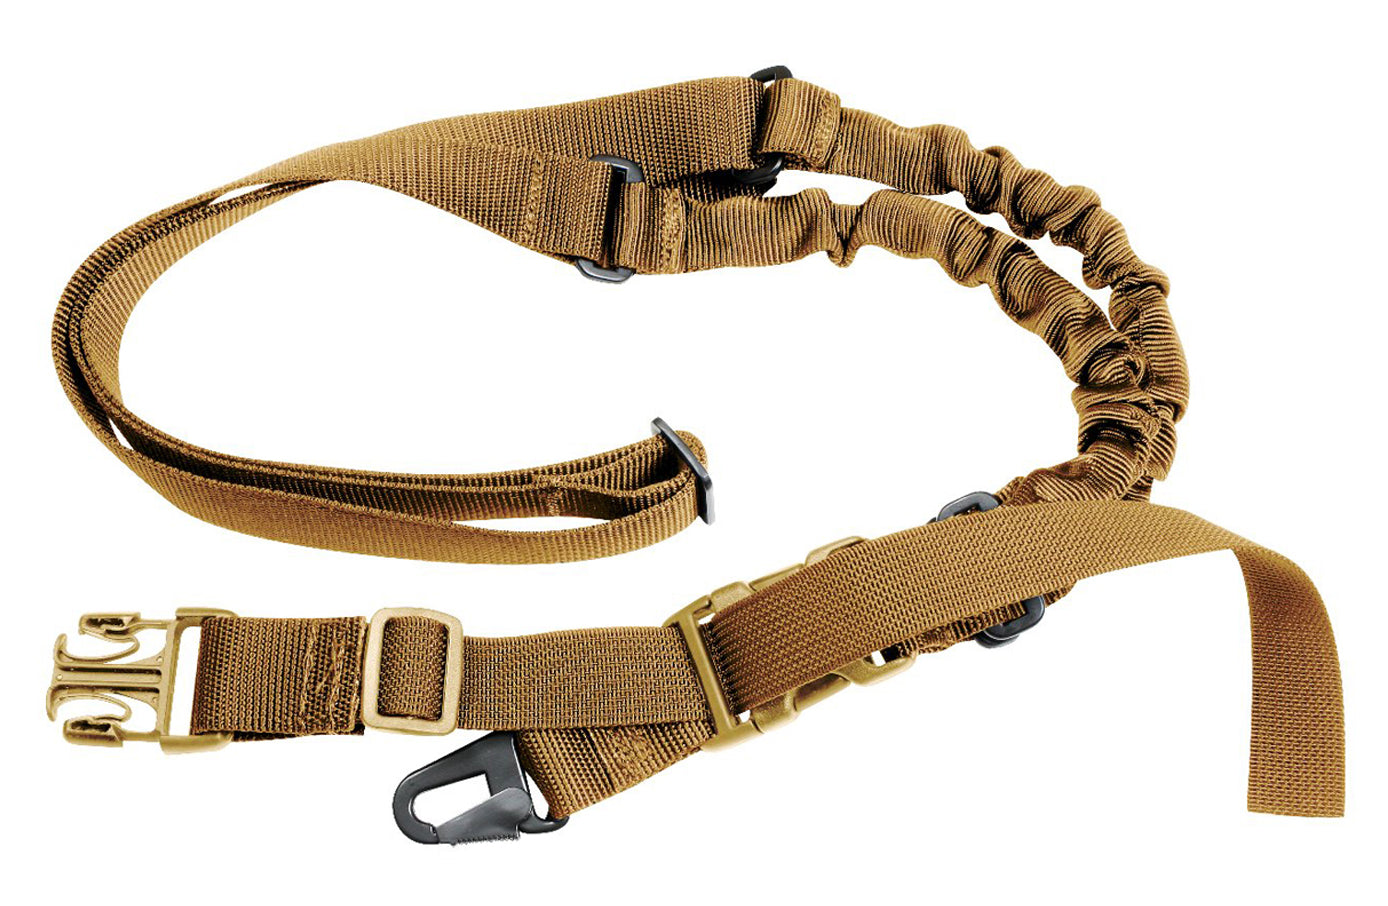 Tactical Single Point Sling